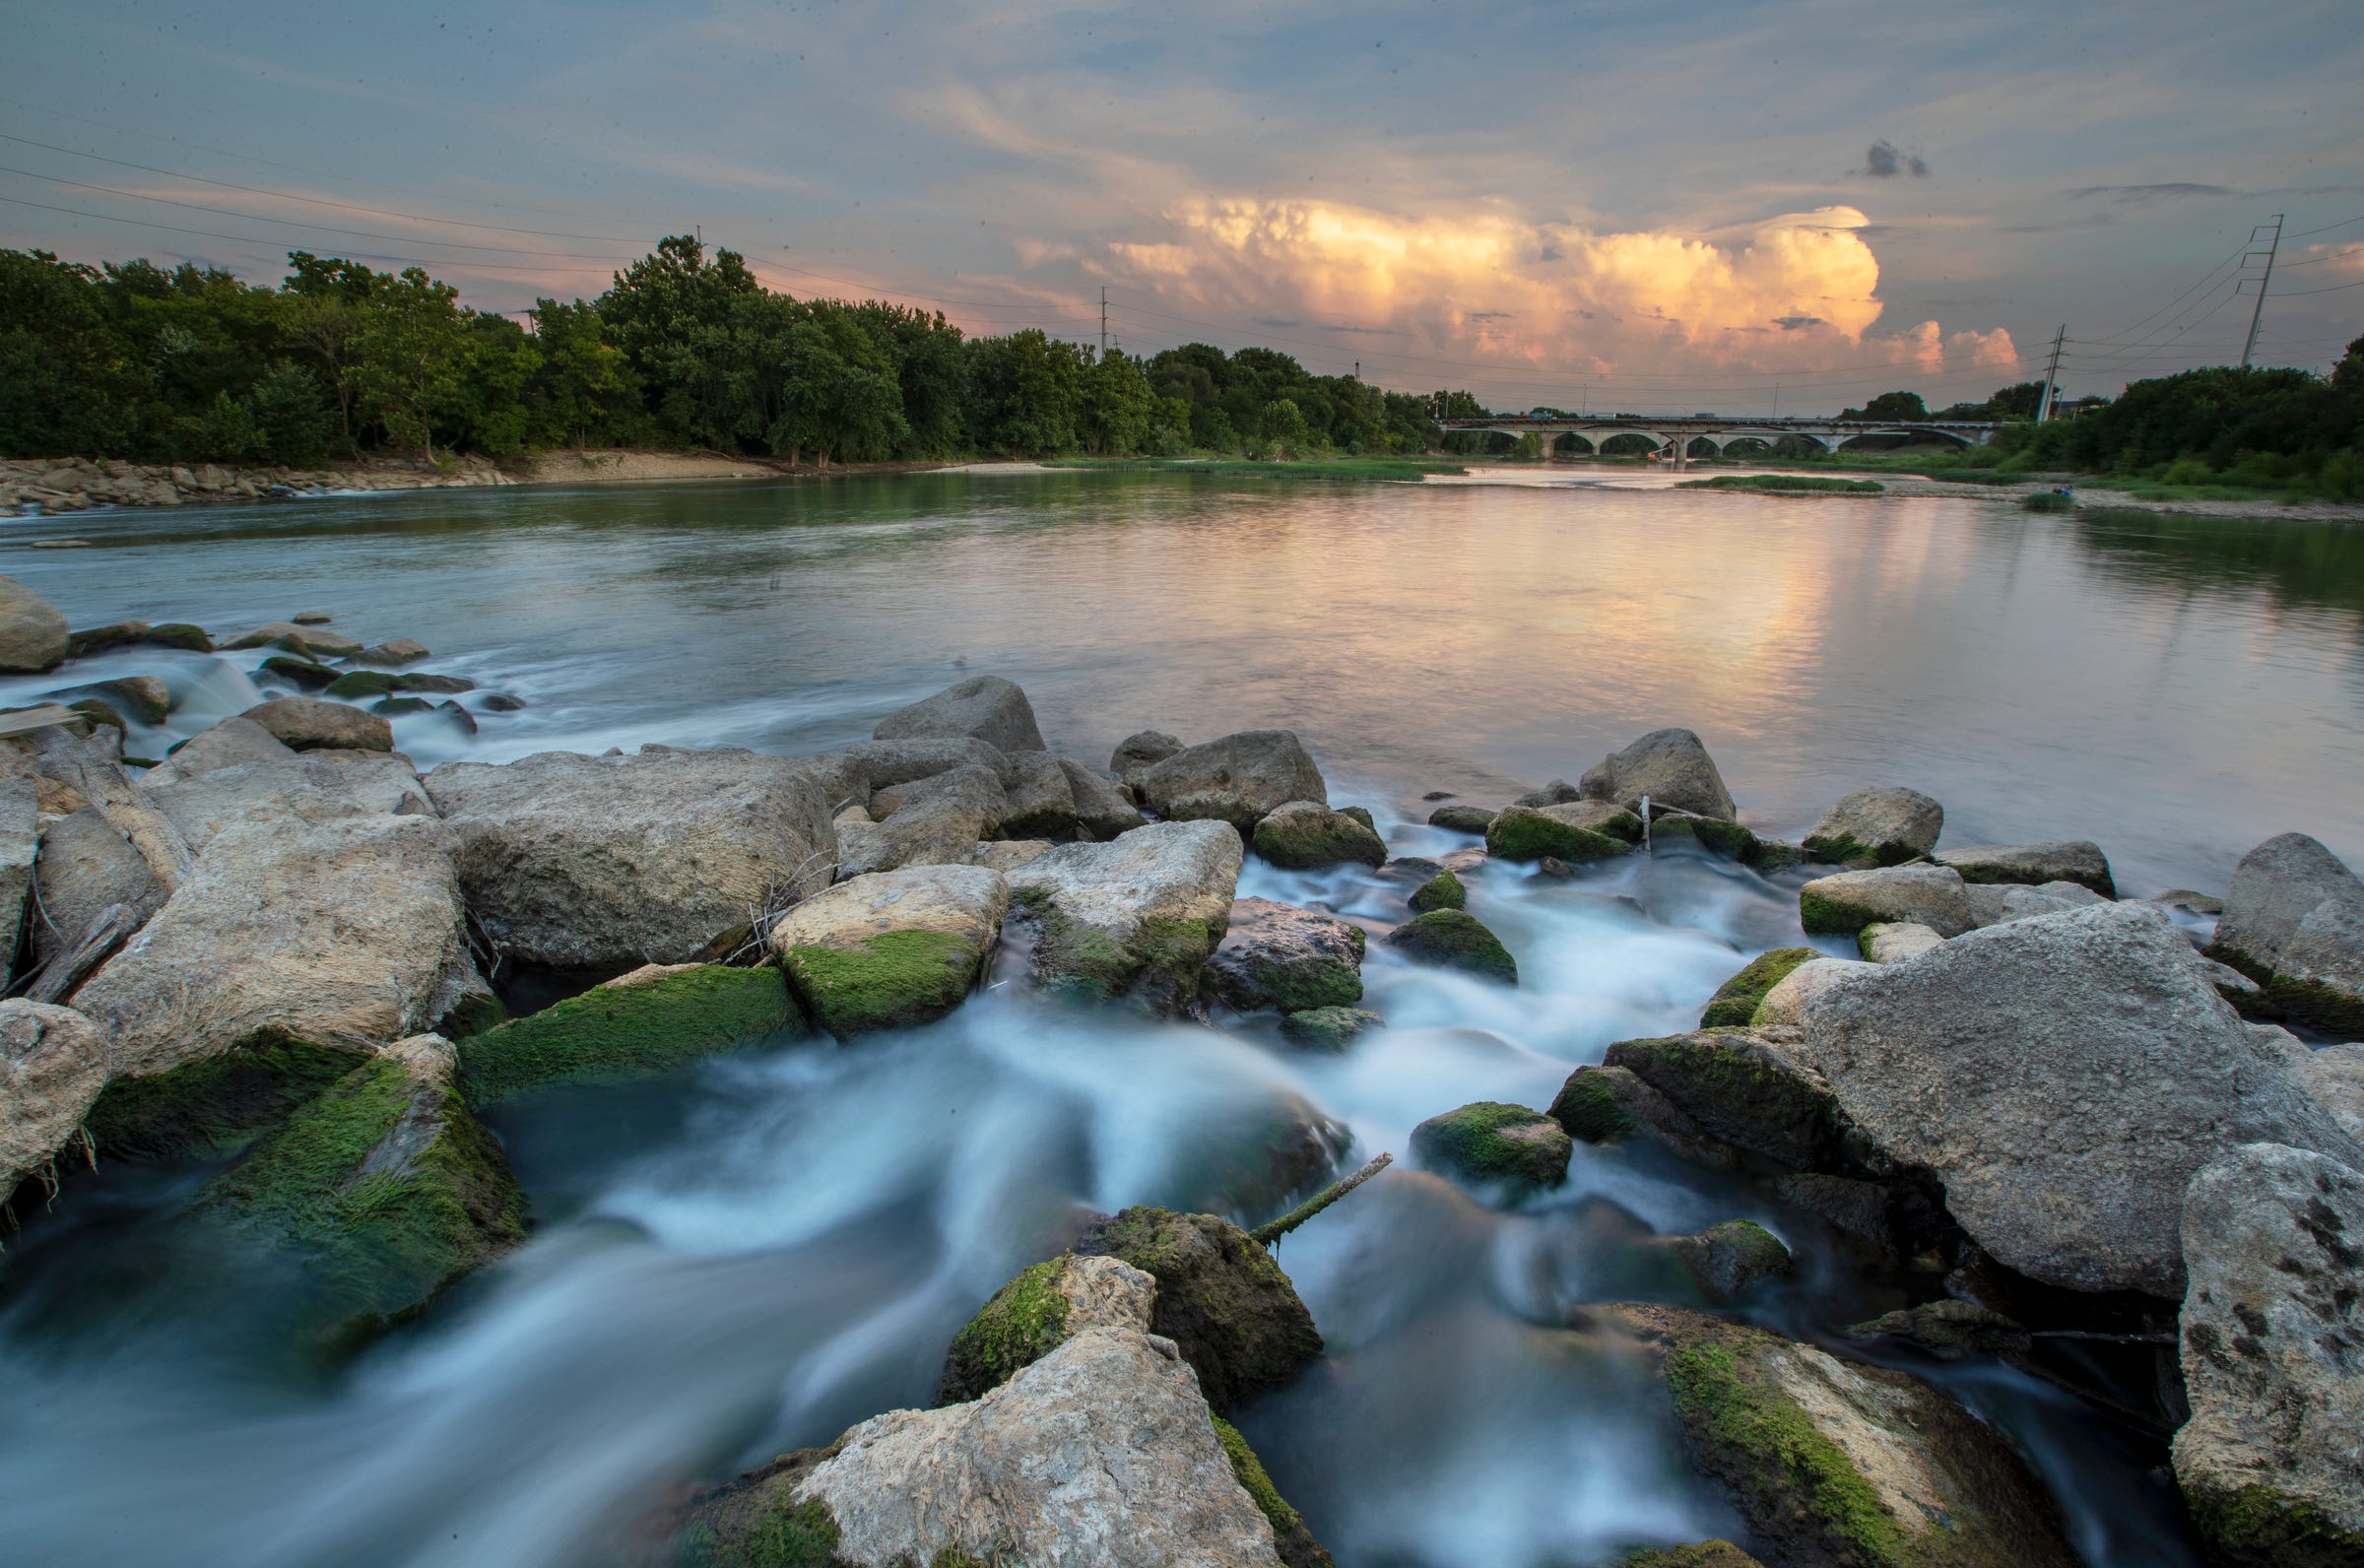 The west fork of the White River, looking to the south, near Downtown Indianapolis on Monday, Aug. 19, 2019.